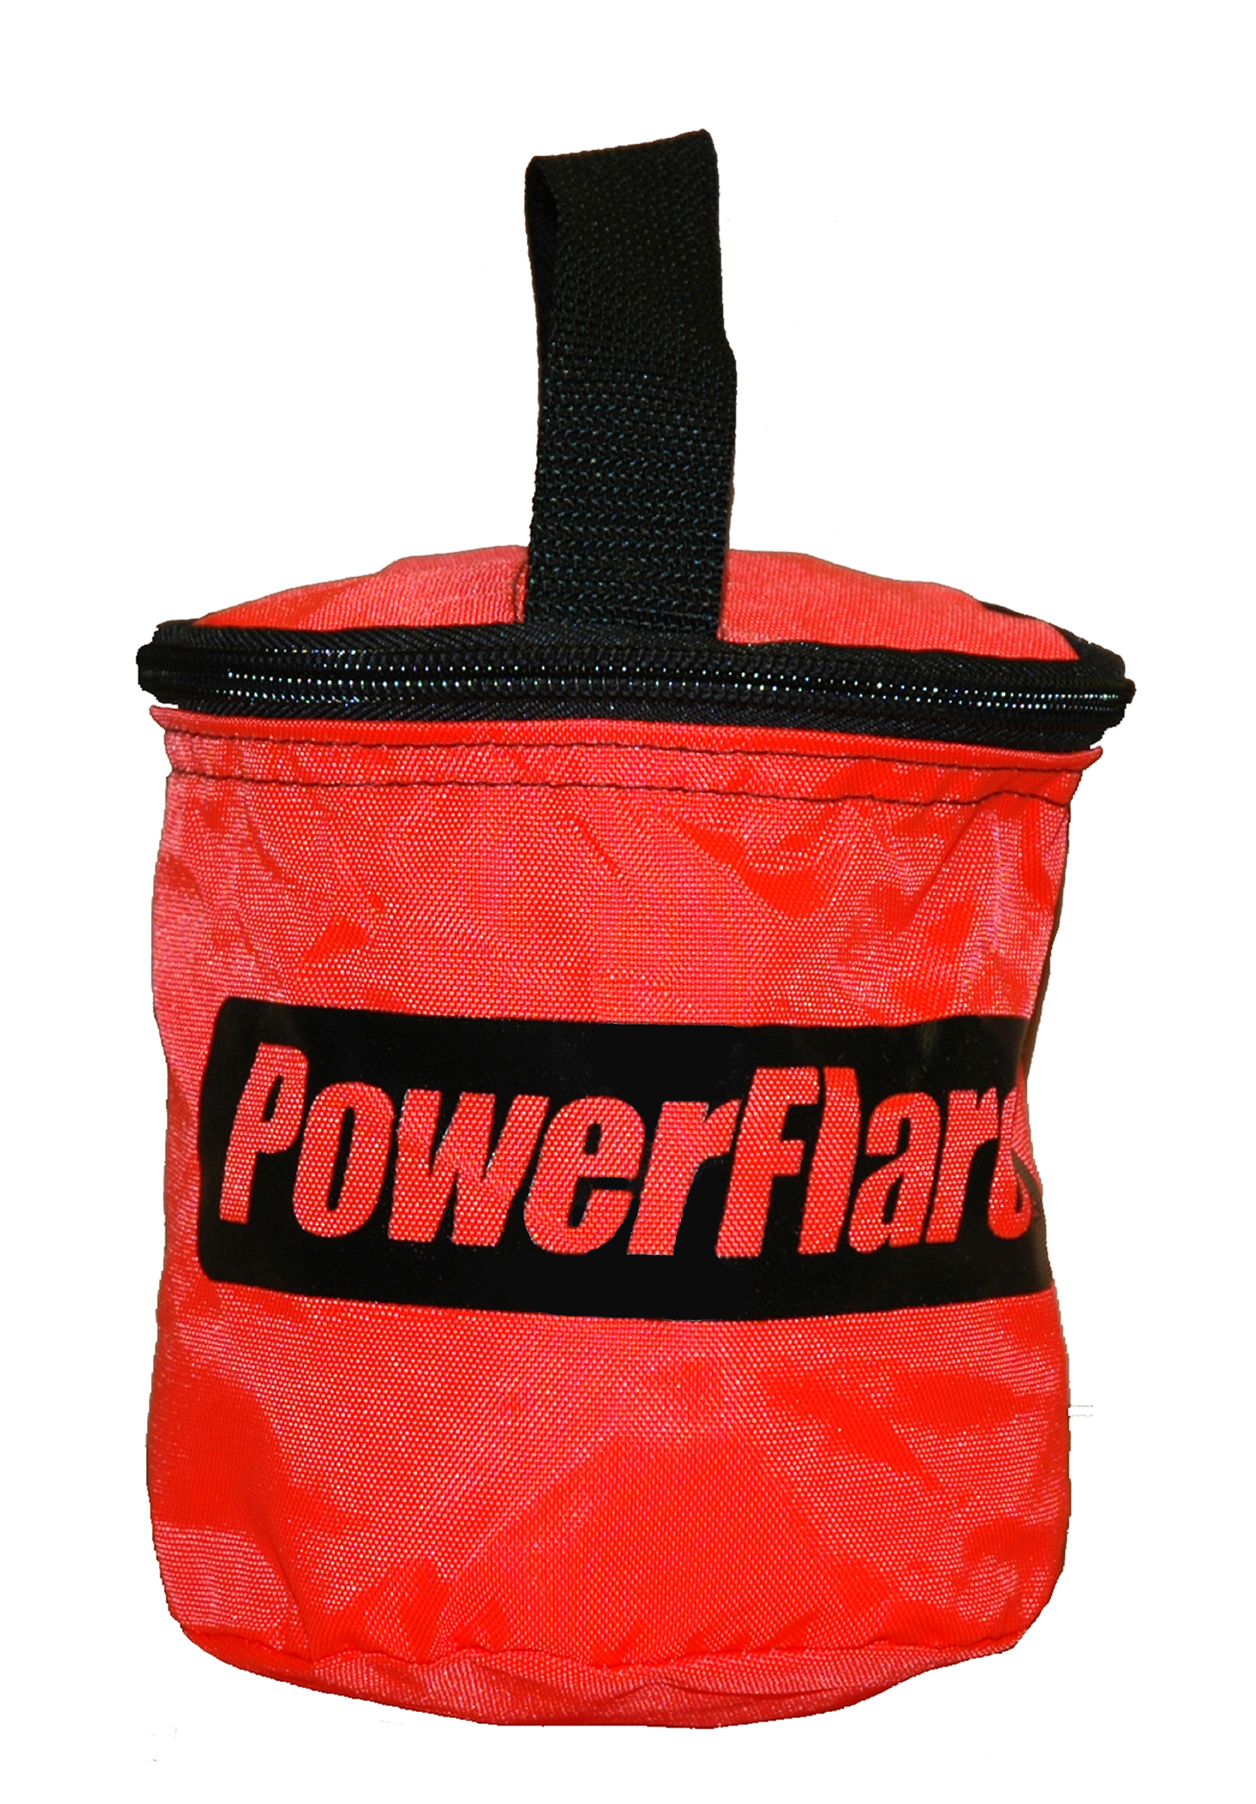 https://op2.0ps.us/original/opplanet-powerflare-small-storage-carry-bag-pf-200-lights-4-bag4-o